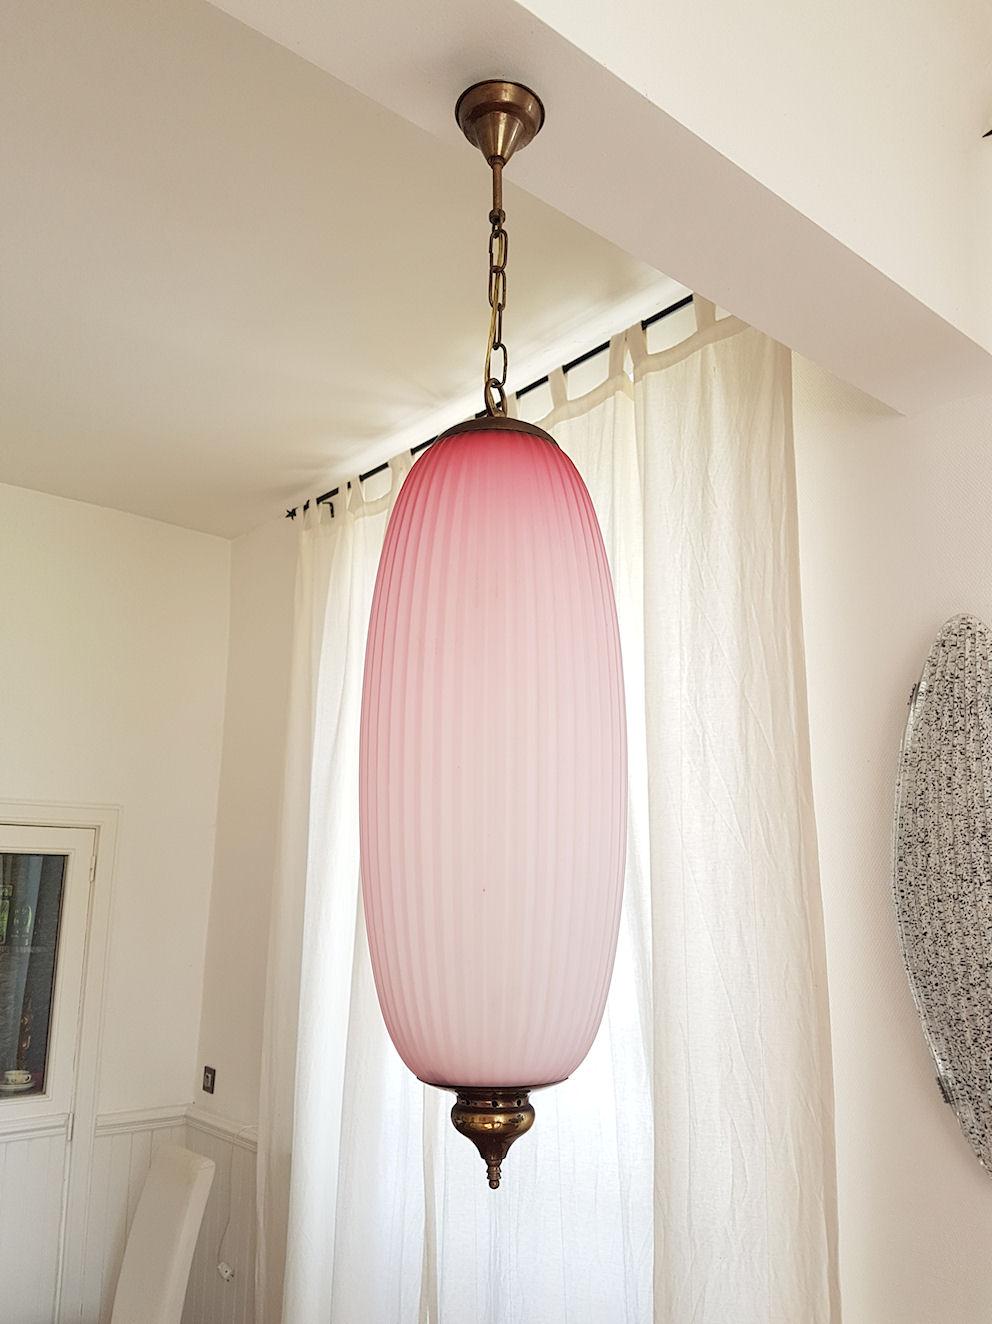 Large pair of Mid-Century Modern pink Murano glass and brass lanterns or pendant lights, Caccia Dominioni style, Italy, 1960s.
Pleated pink to white translucent glass lights, with brass mounts. Beautiful quality.
1 light each, rewired for the